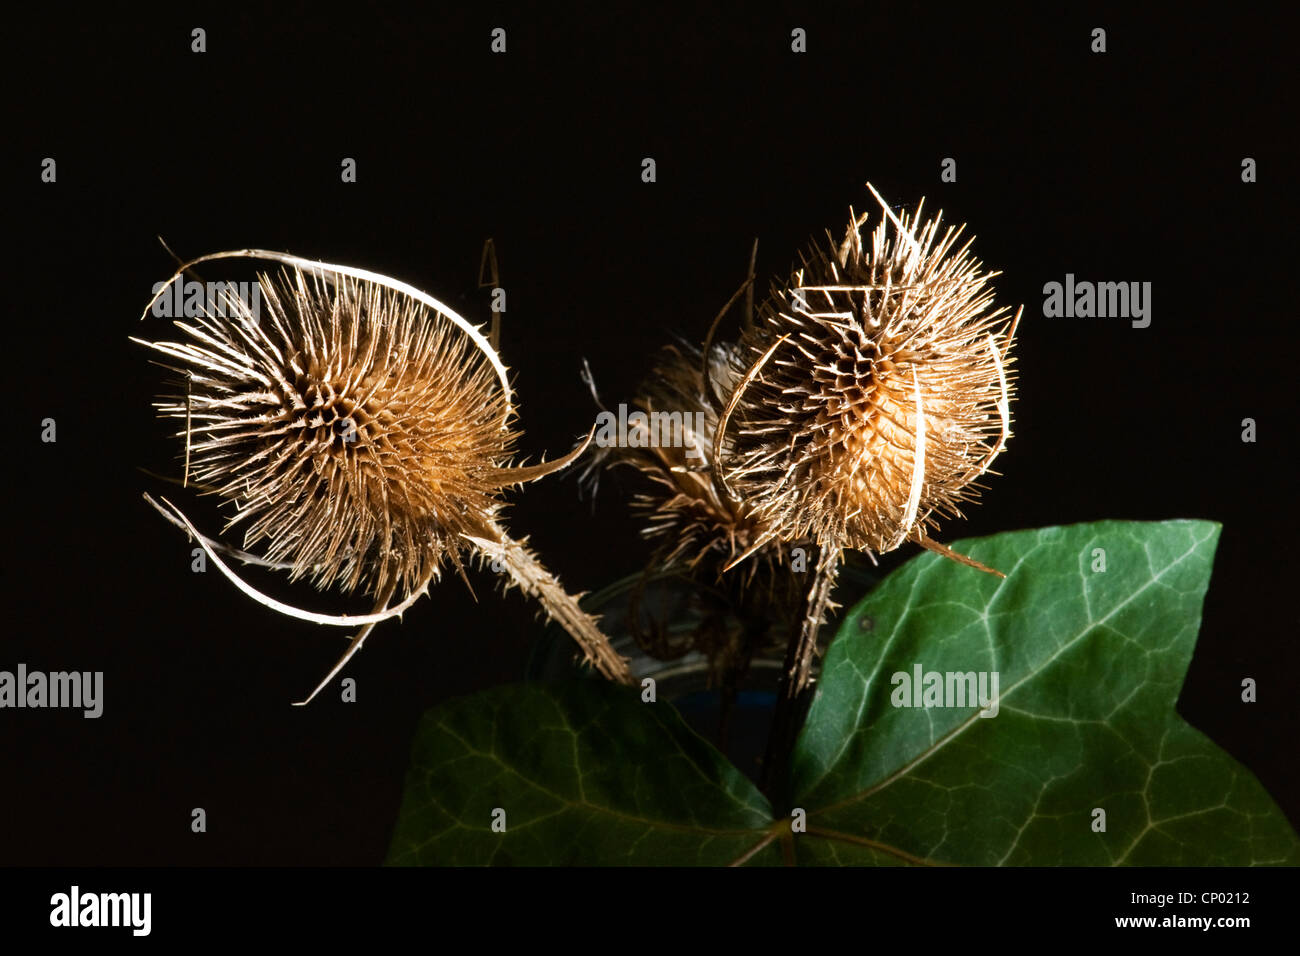 Still life micro macro study on black background & side lighting plant thistle Carduus pods seeds leafs Stock Photo